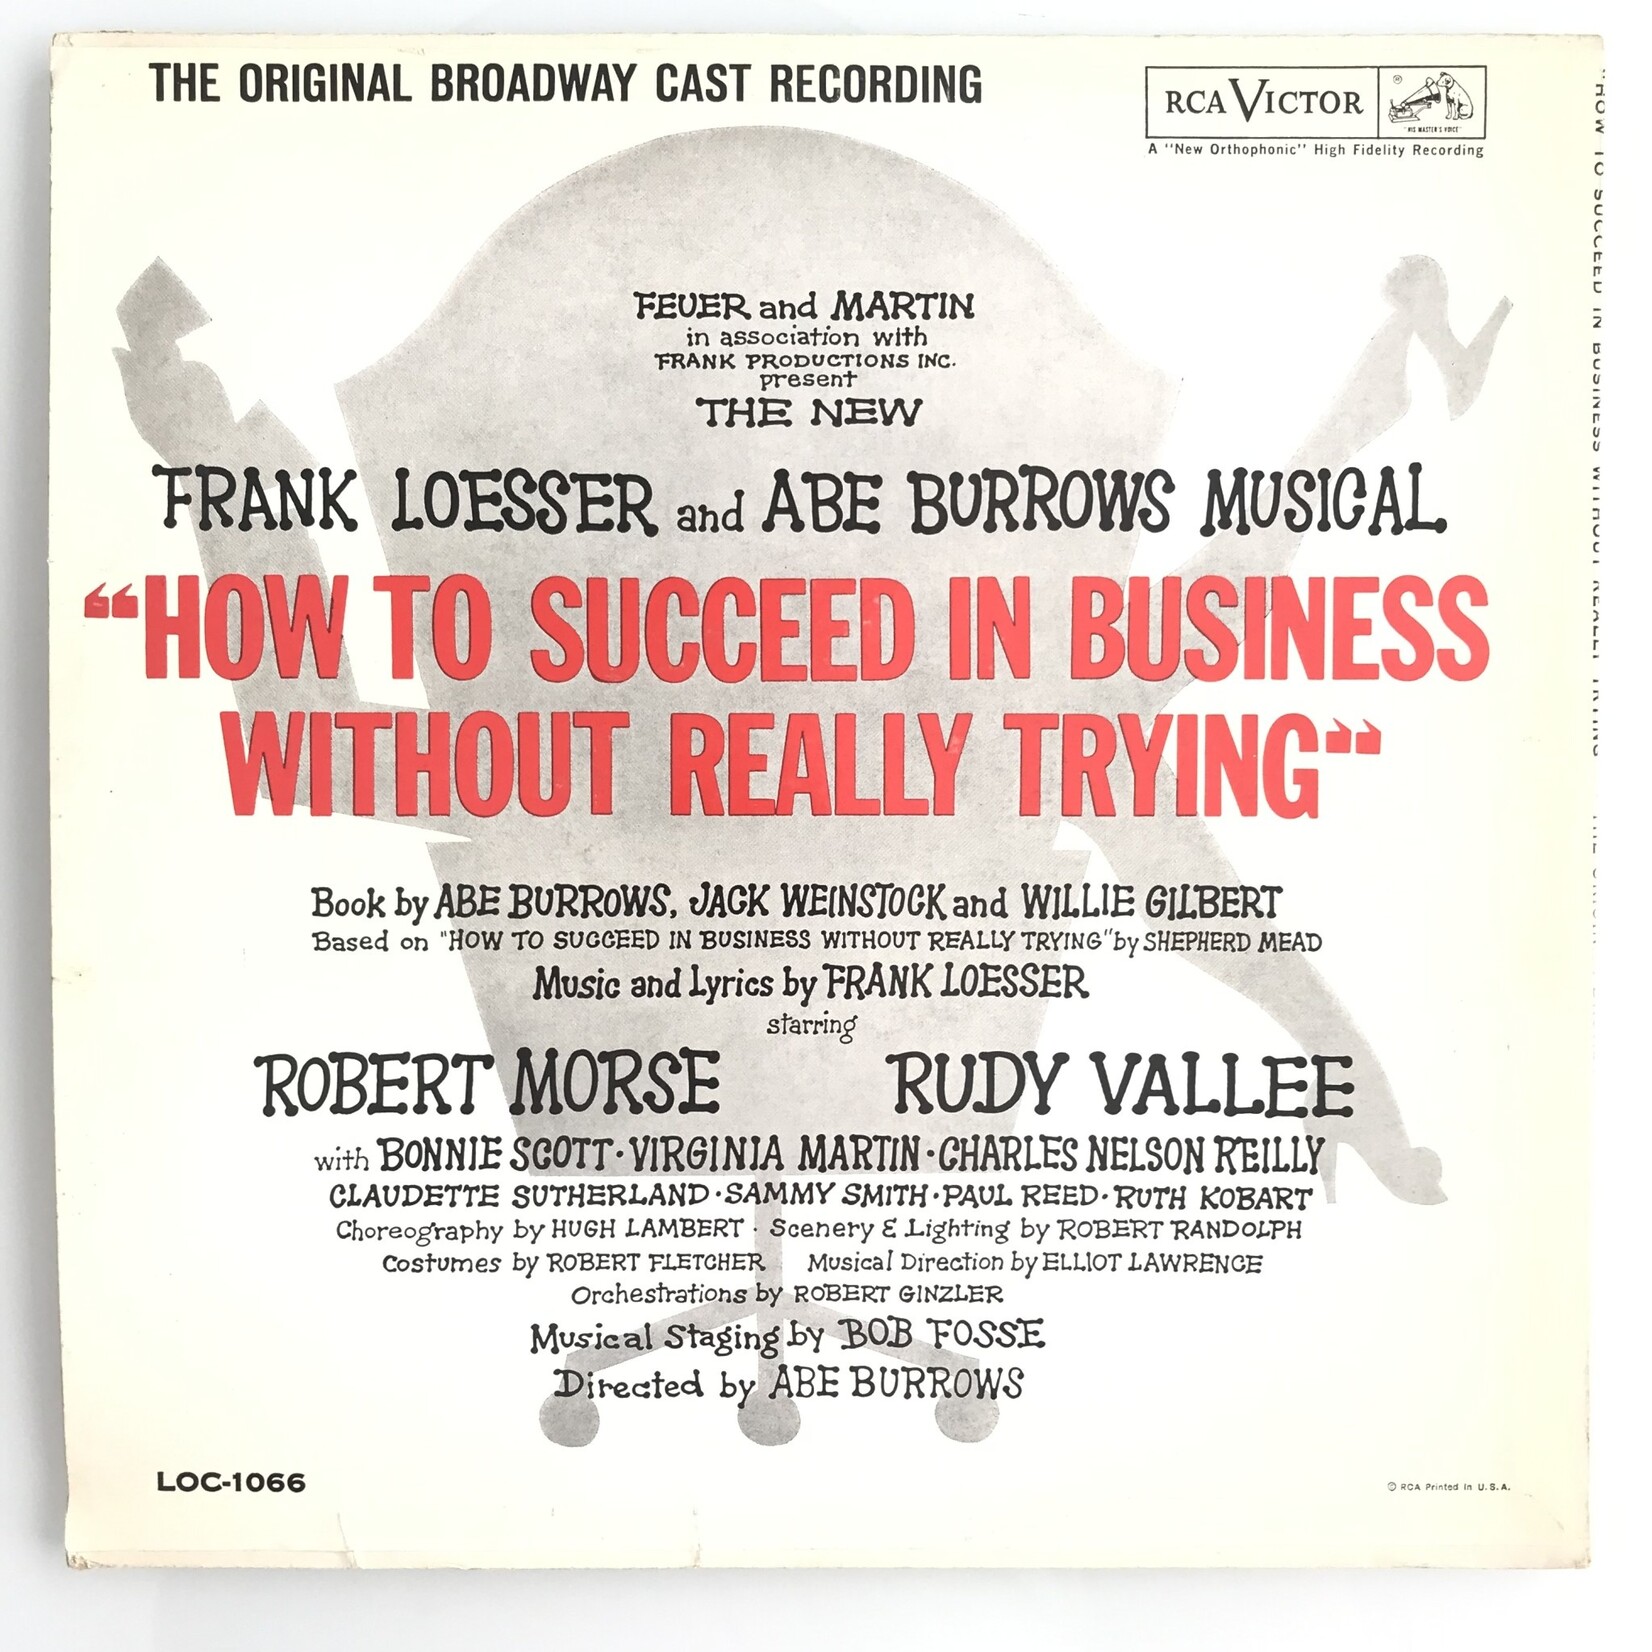 Frank Loesser, Abe Burrows - How To Succeed In Business Without Really Trying Original Broadway Cast Recording - Vinyl LP (USED)